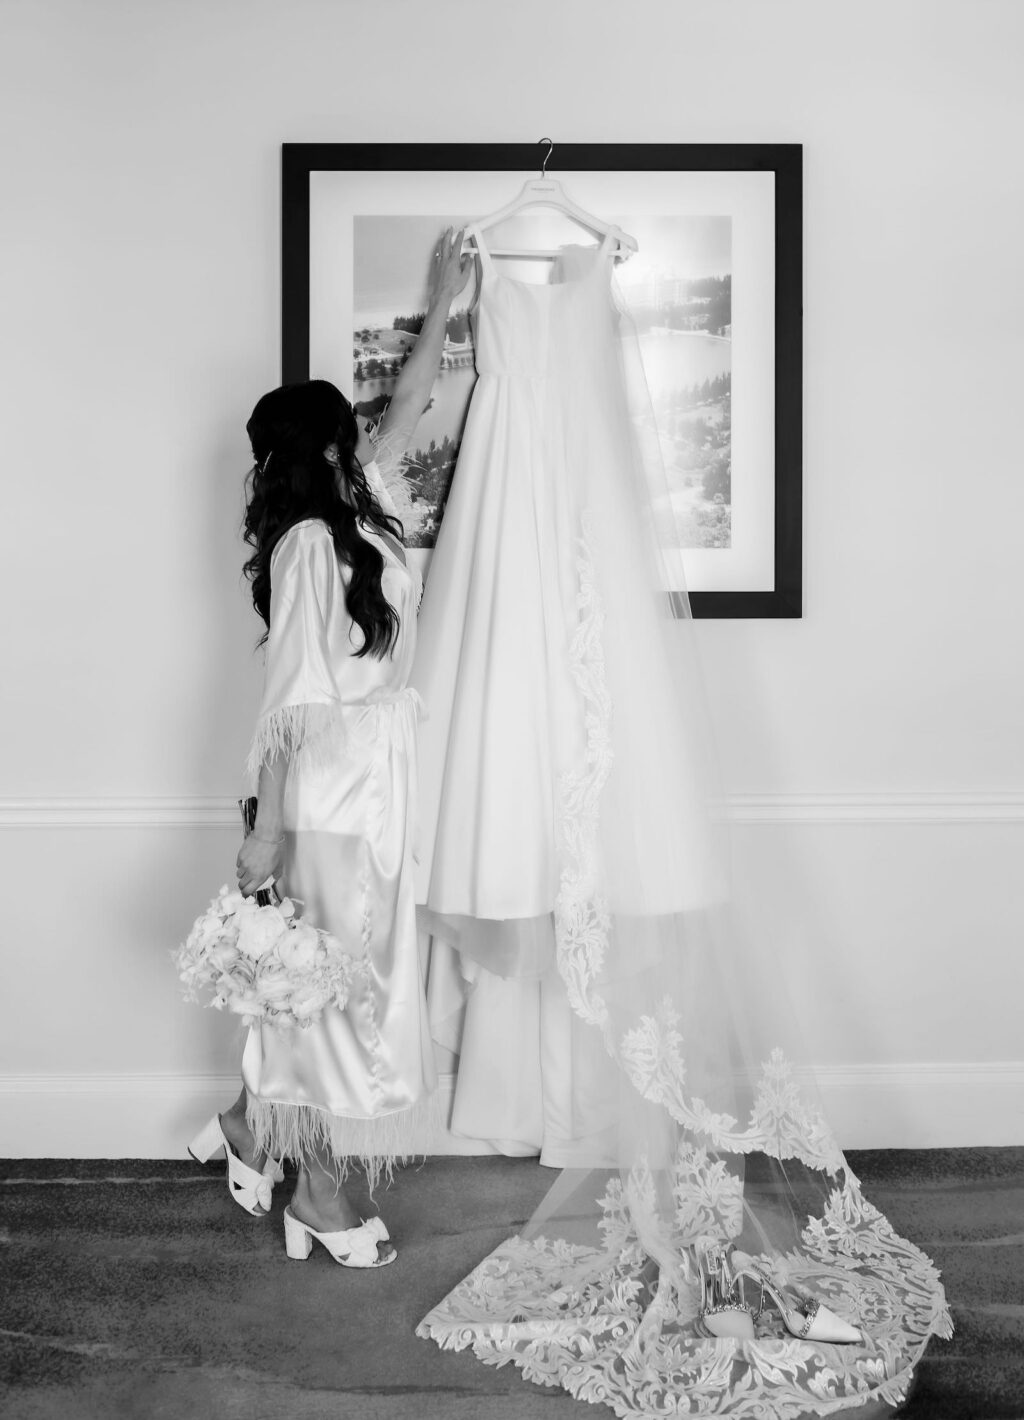 Classic Black and White Photo of Bride with Hanging A Line Wedding Dress and Full Length Veil Holding Floral Bouquet